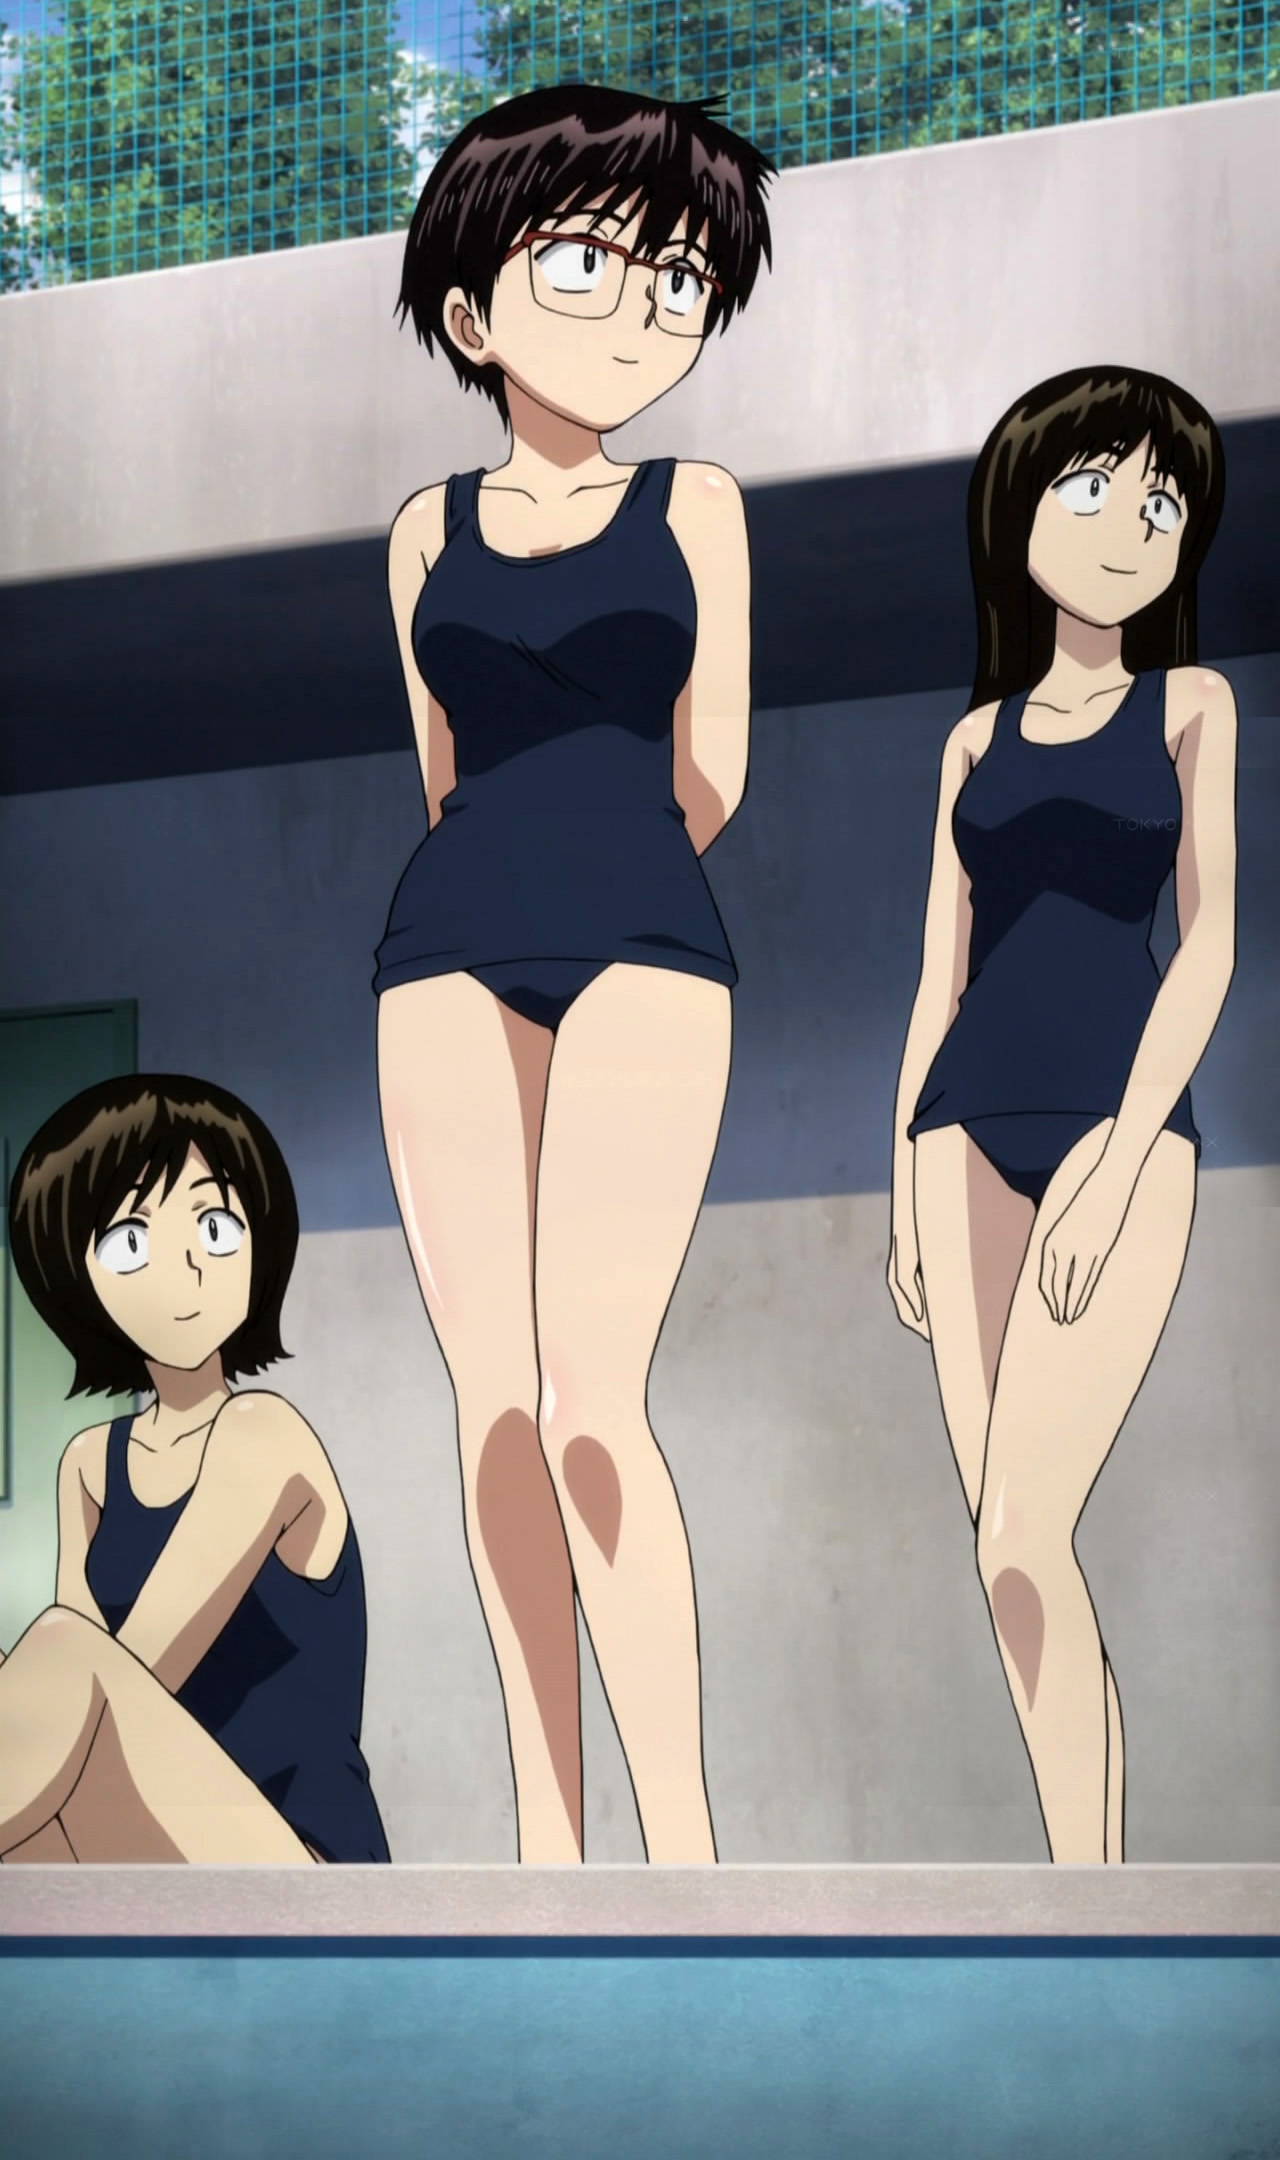 Names in Mysterious Girlfriend X